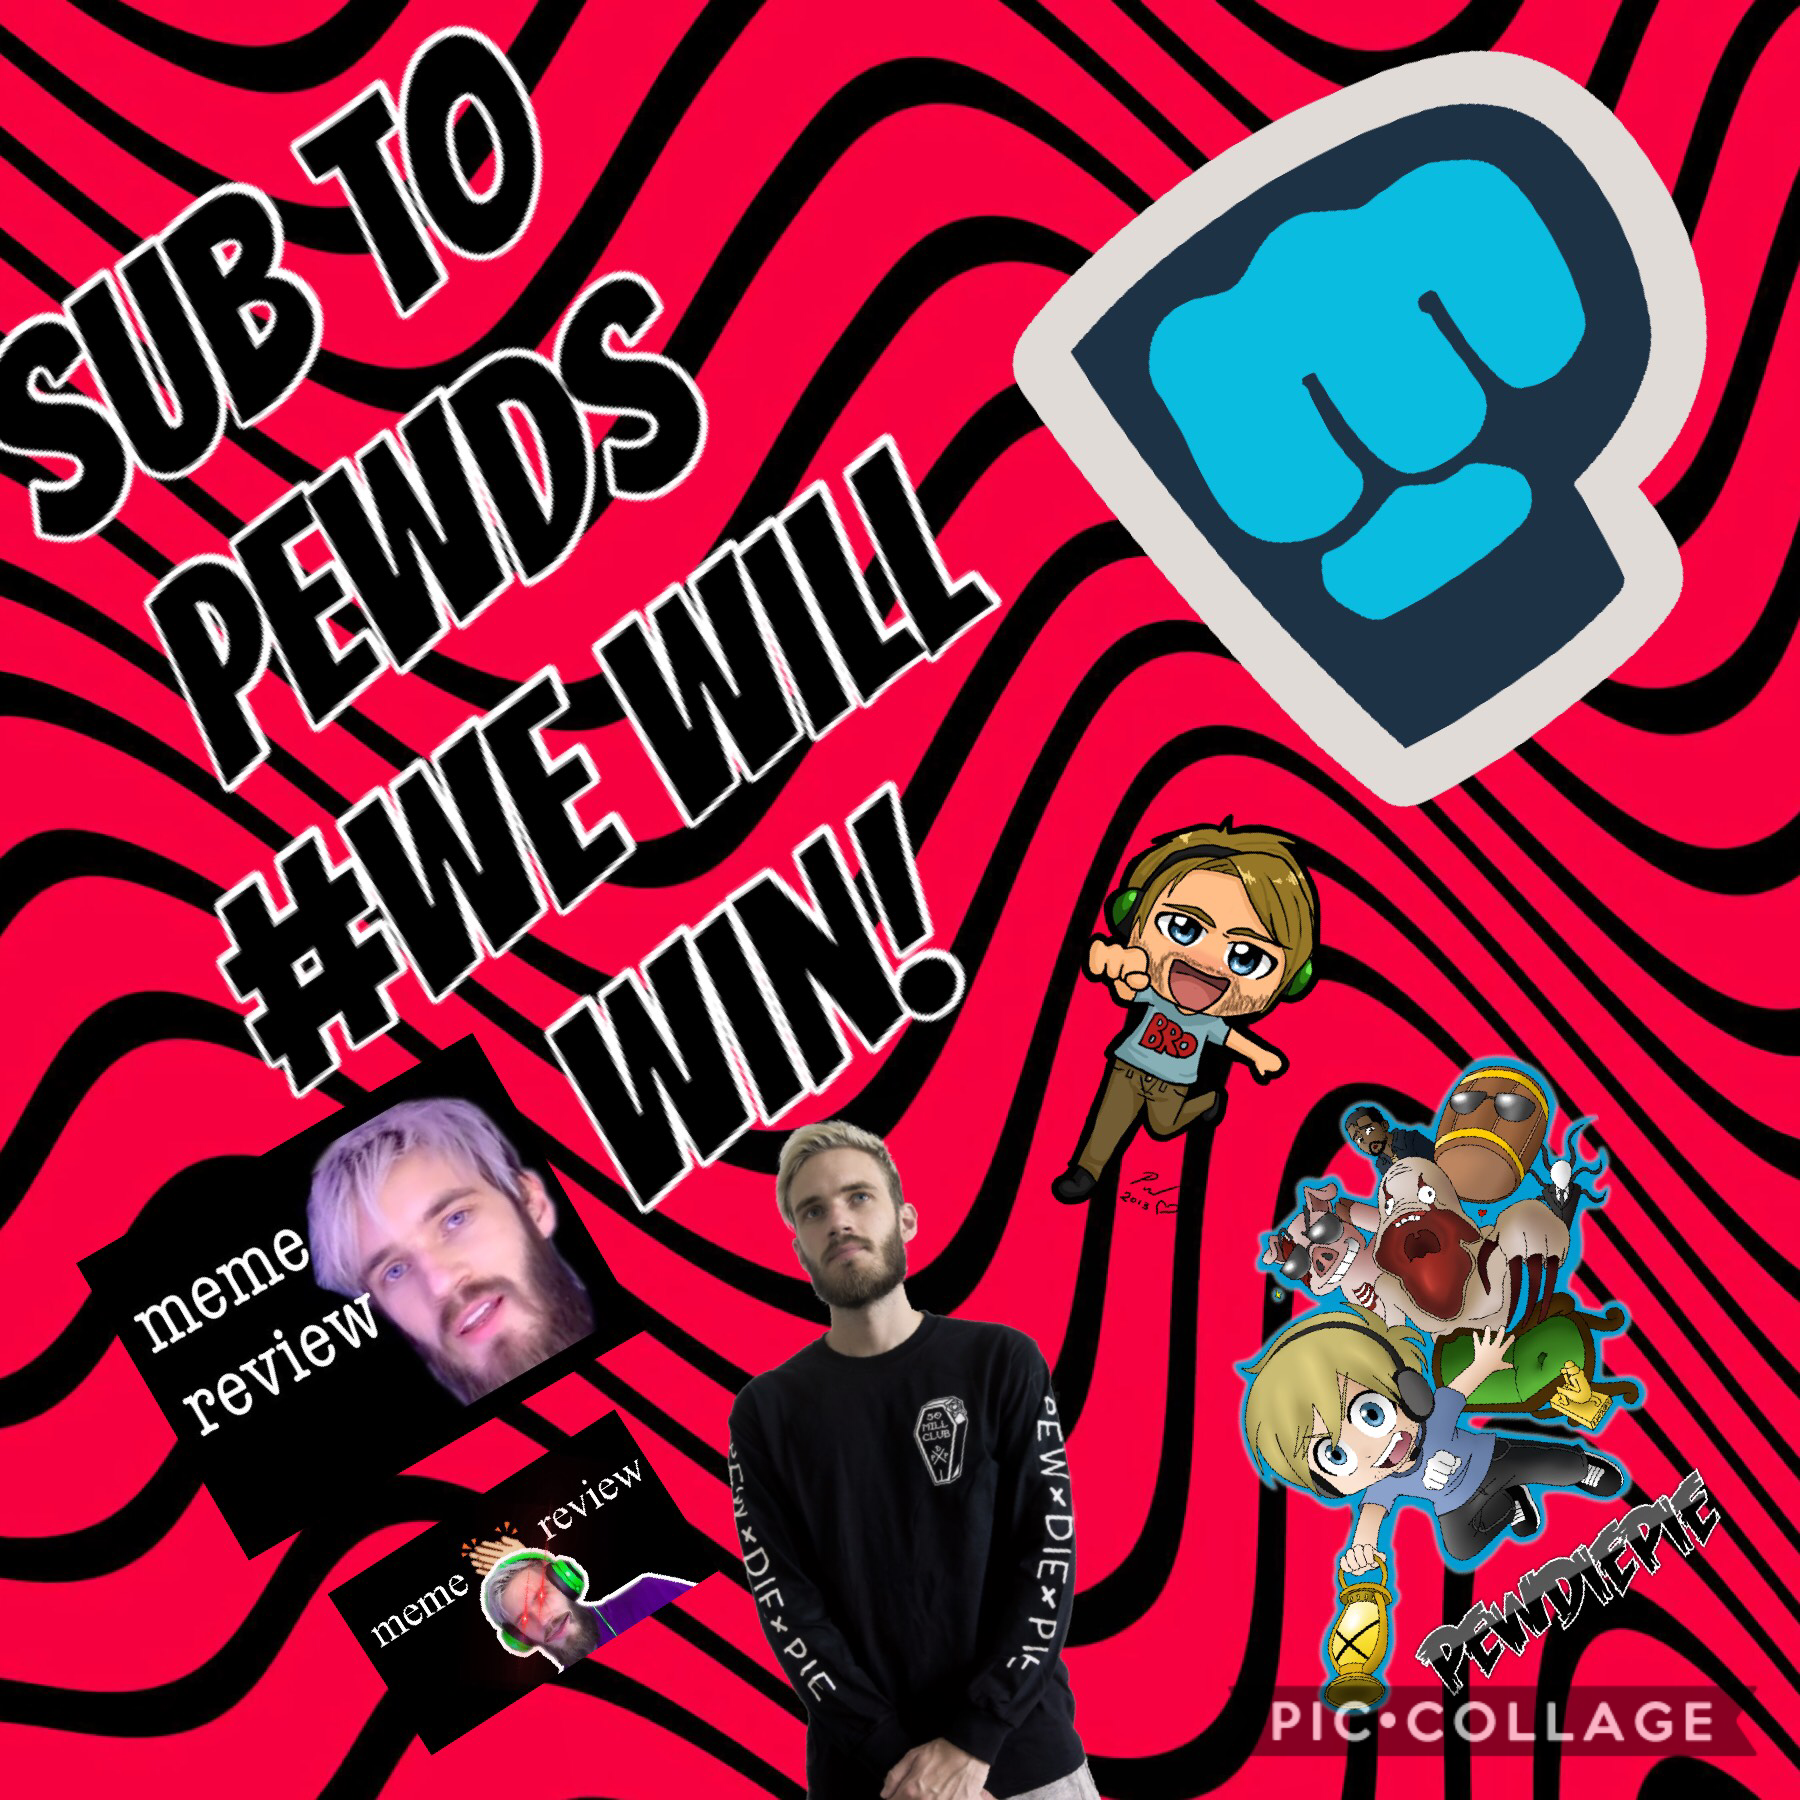 #we will win lol sub to pewds
